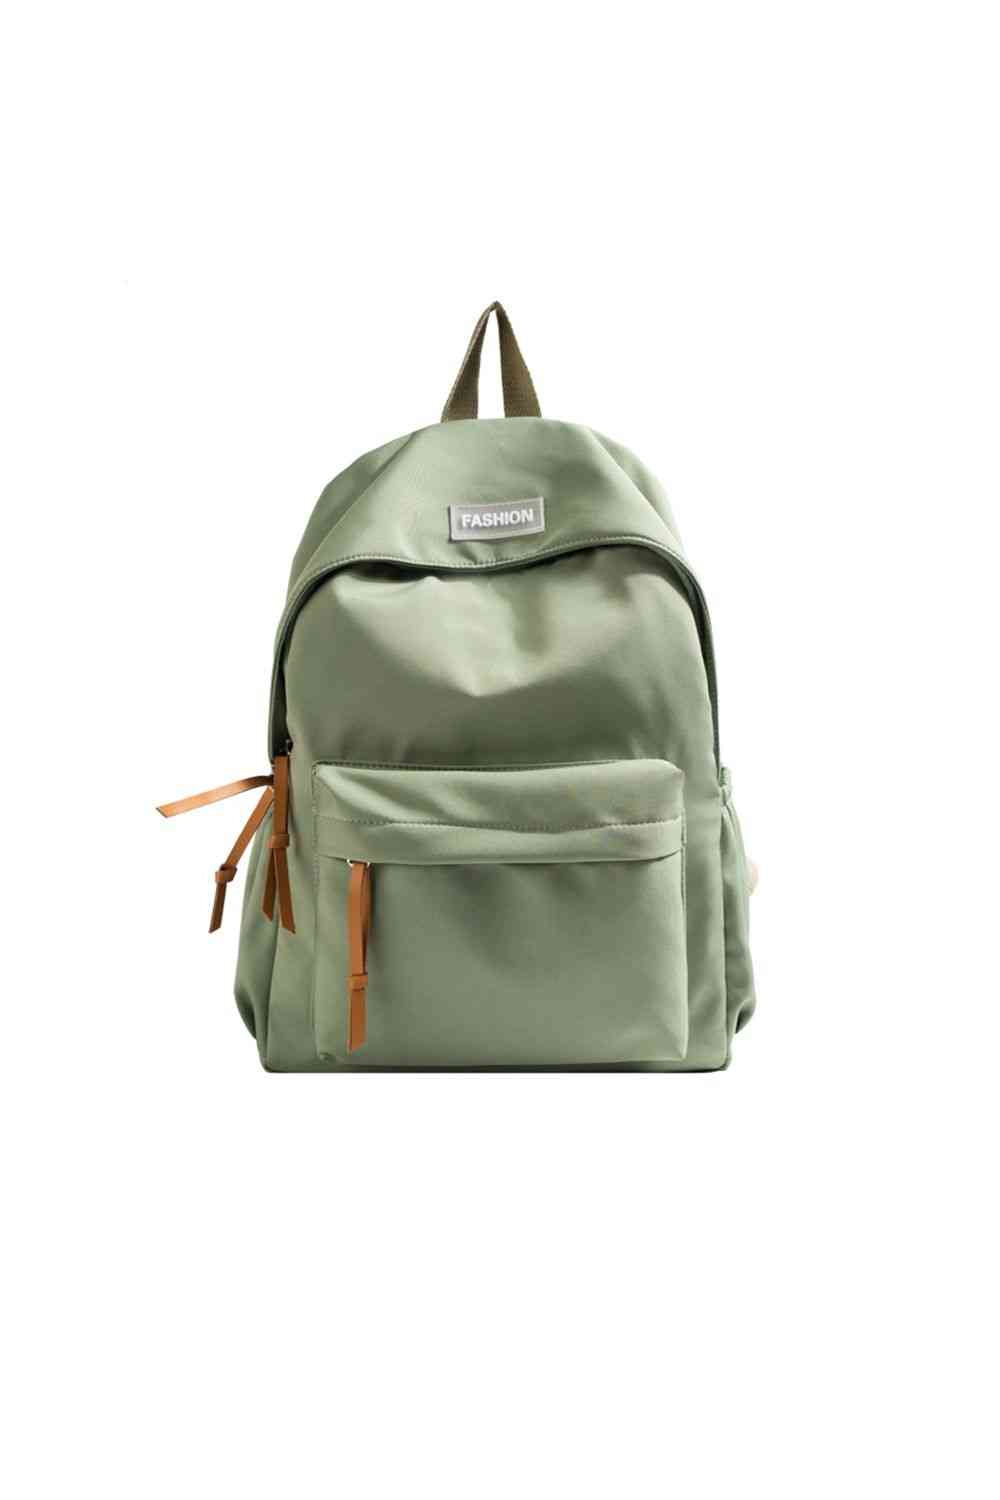 Adored FASHION Polyester Backpack Light Green One Size